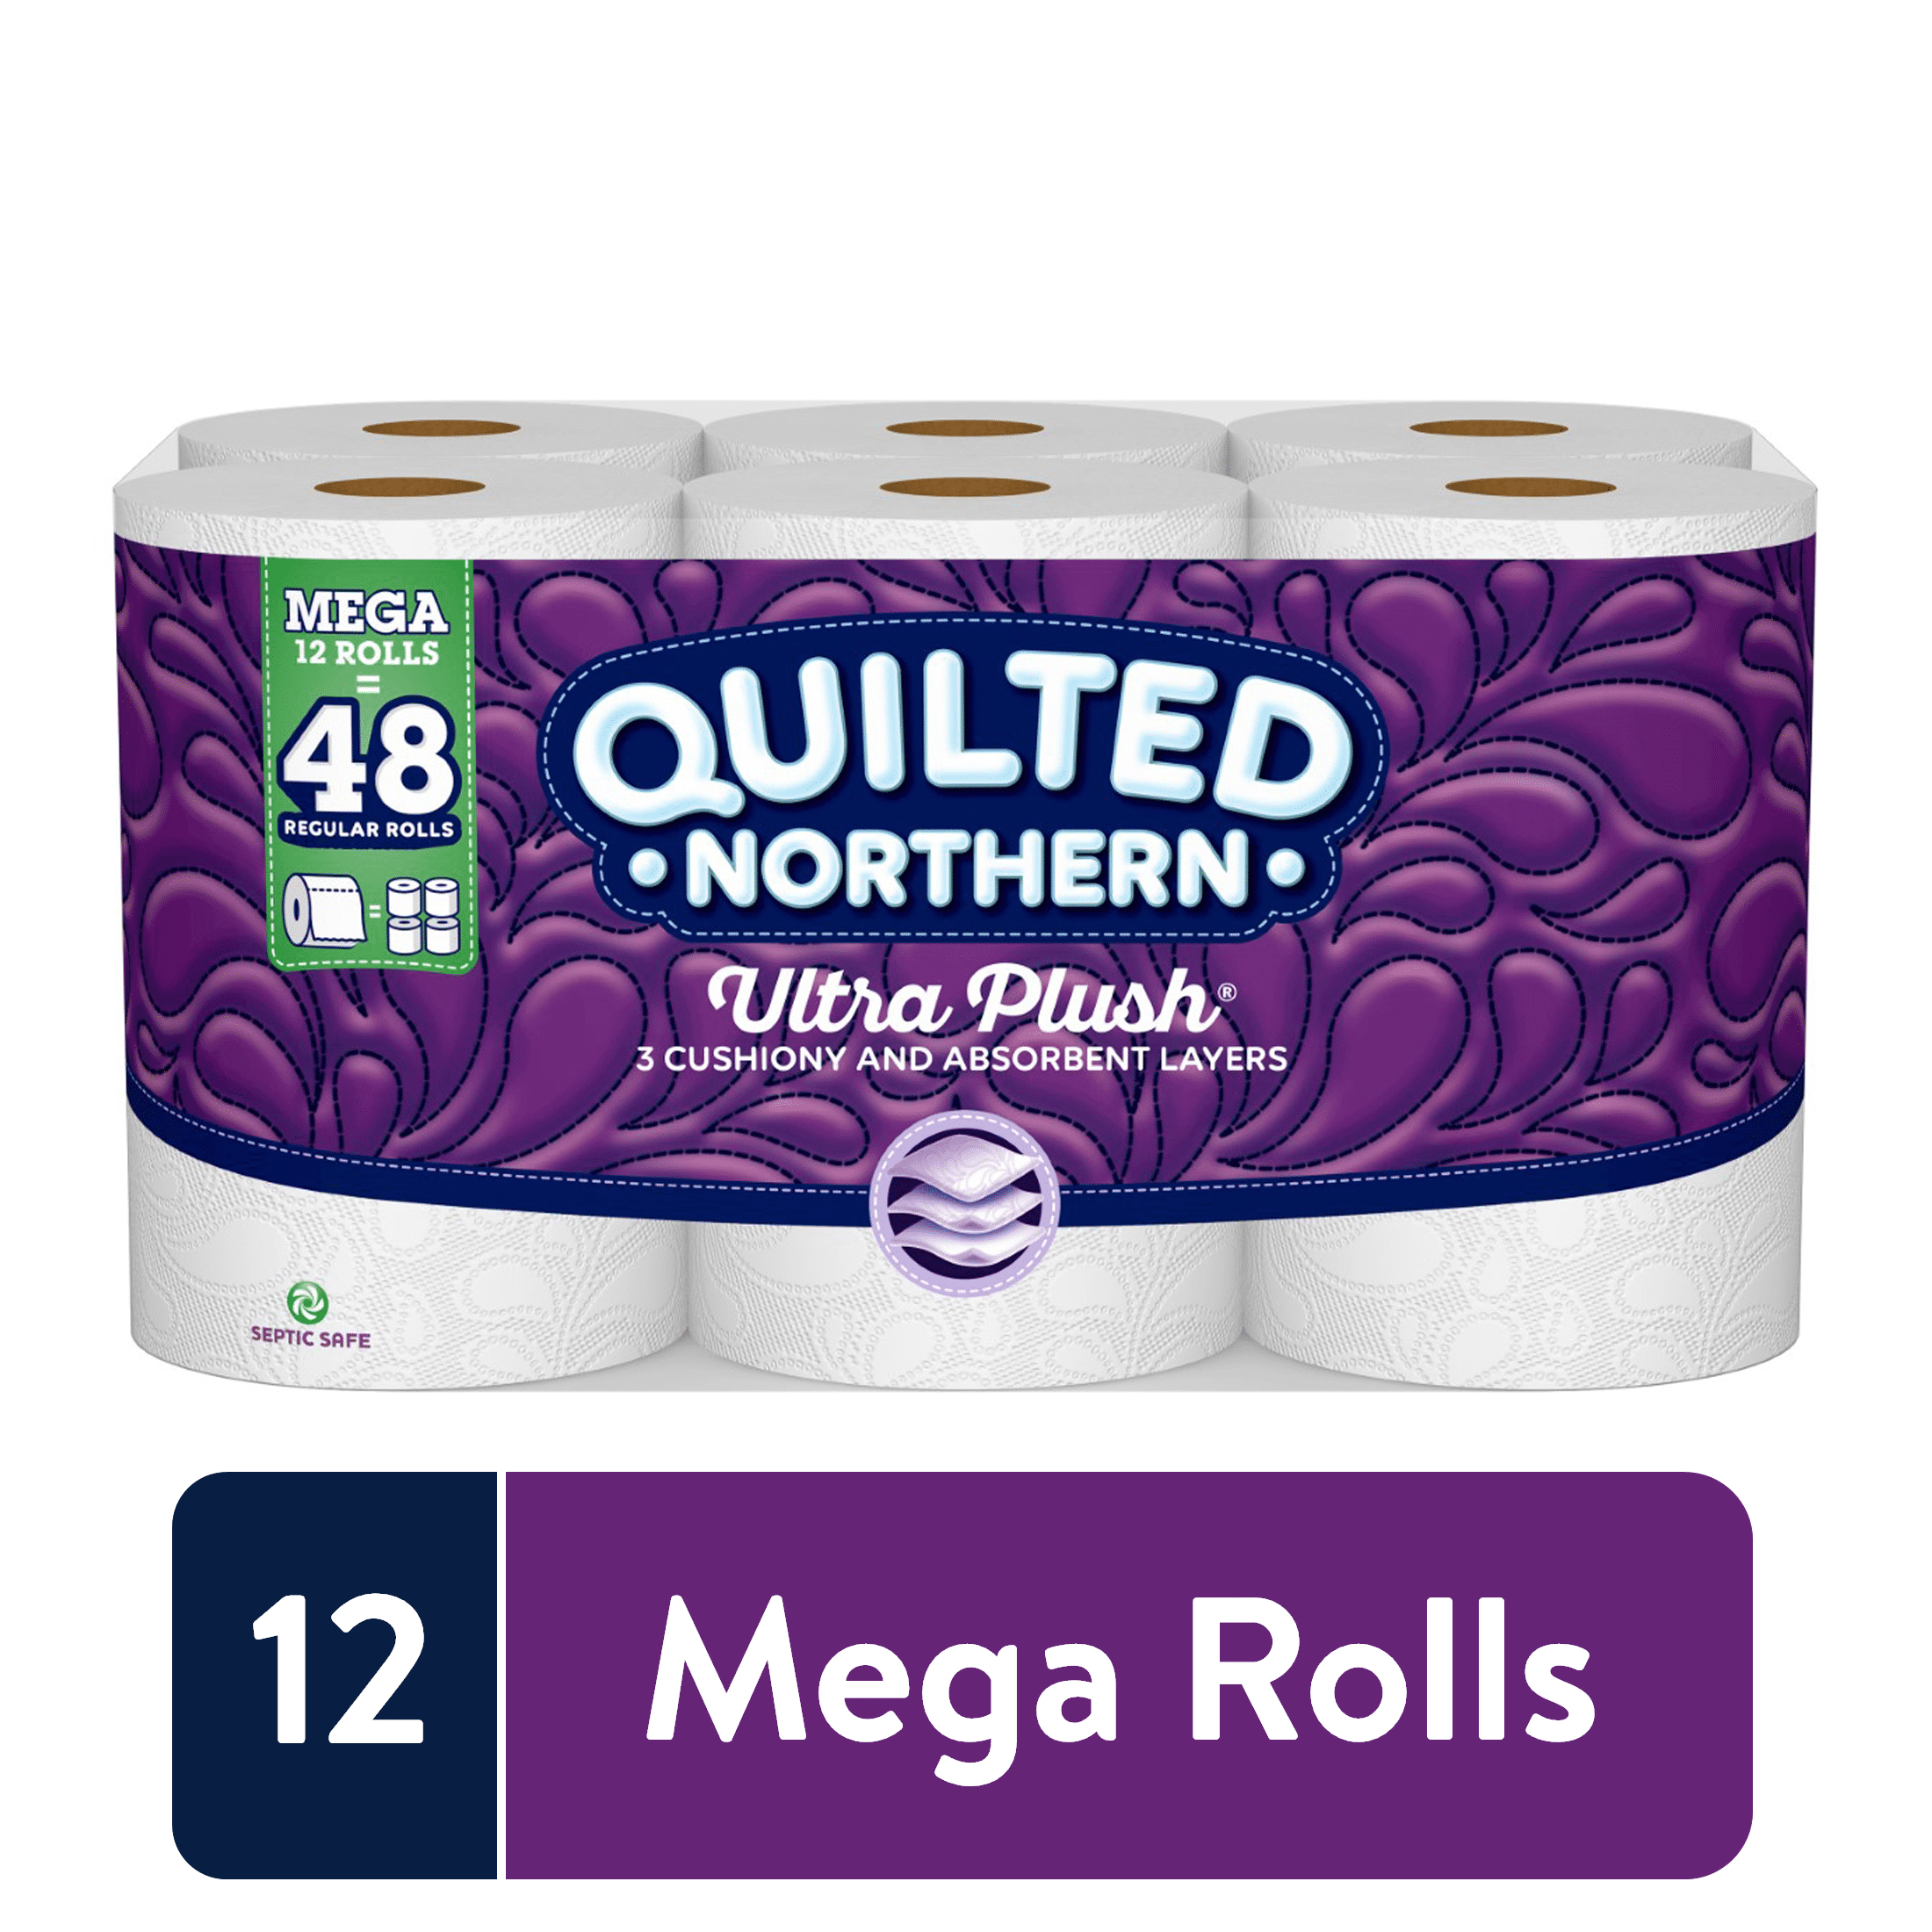 Quilted Northern® Toilet Paper